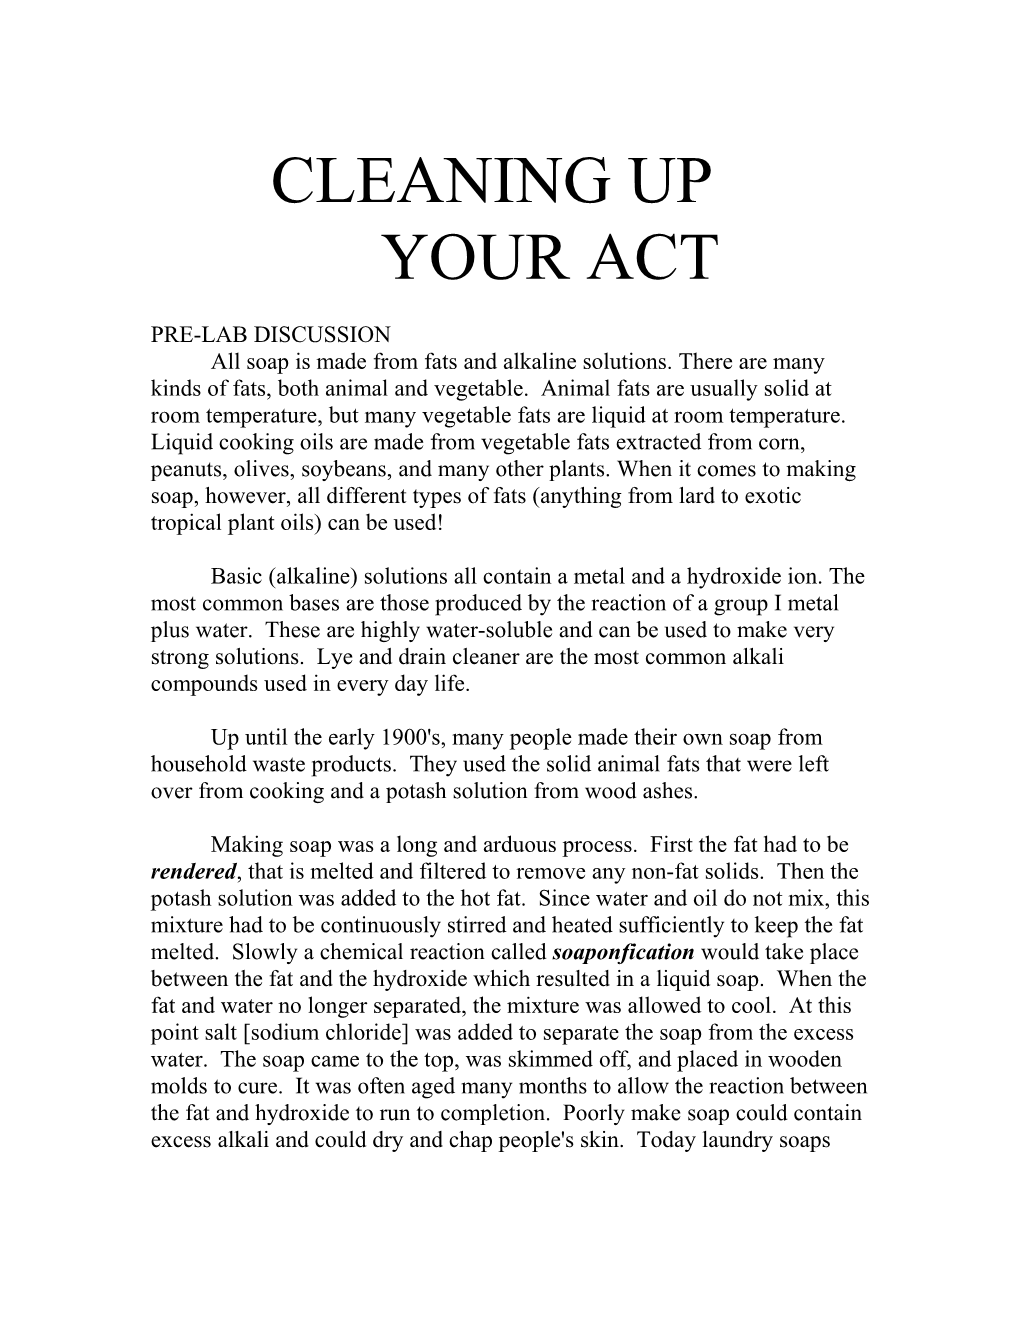 Cleaning up Your Act